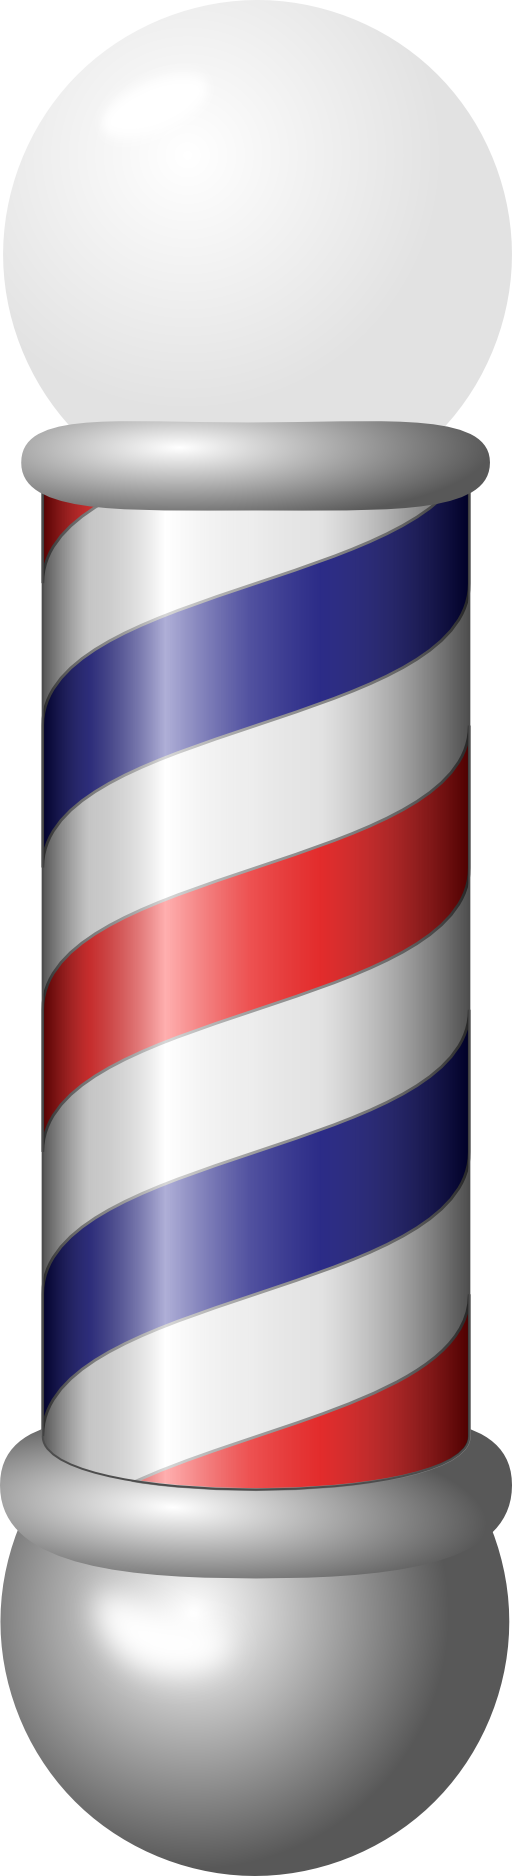 Barber Pole Clipart | i2Clipart - Royalty Free Public Domain Clipart